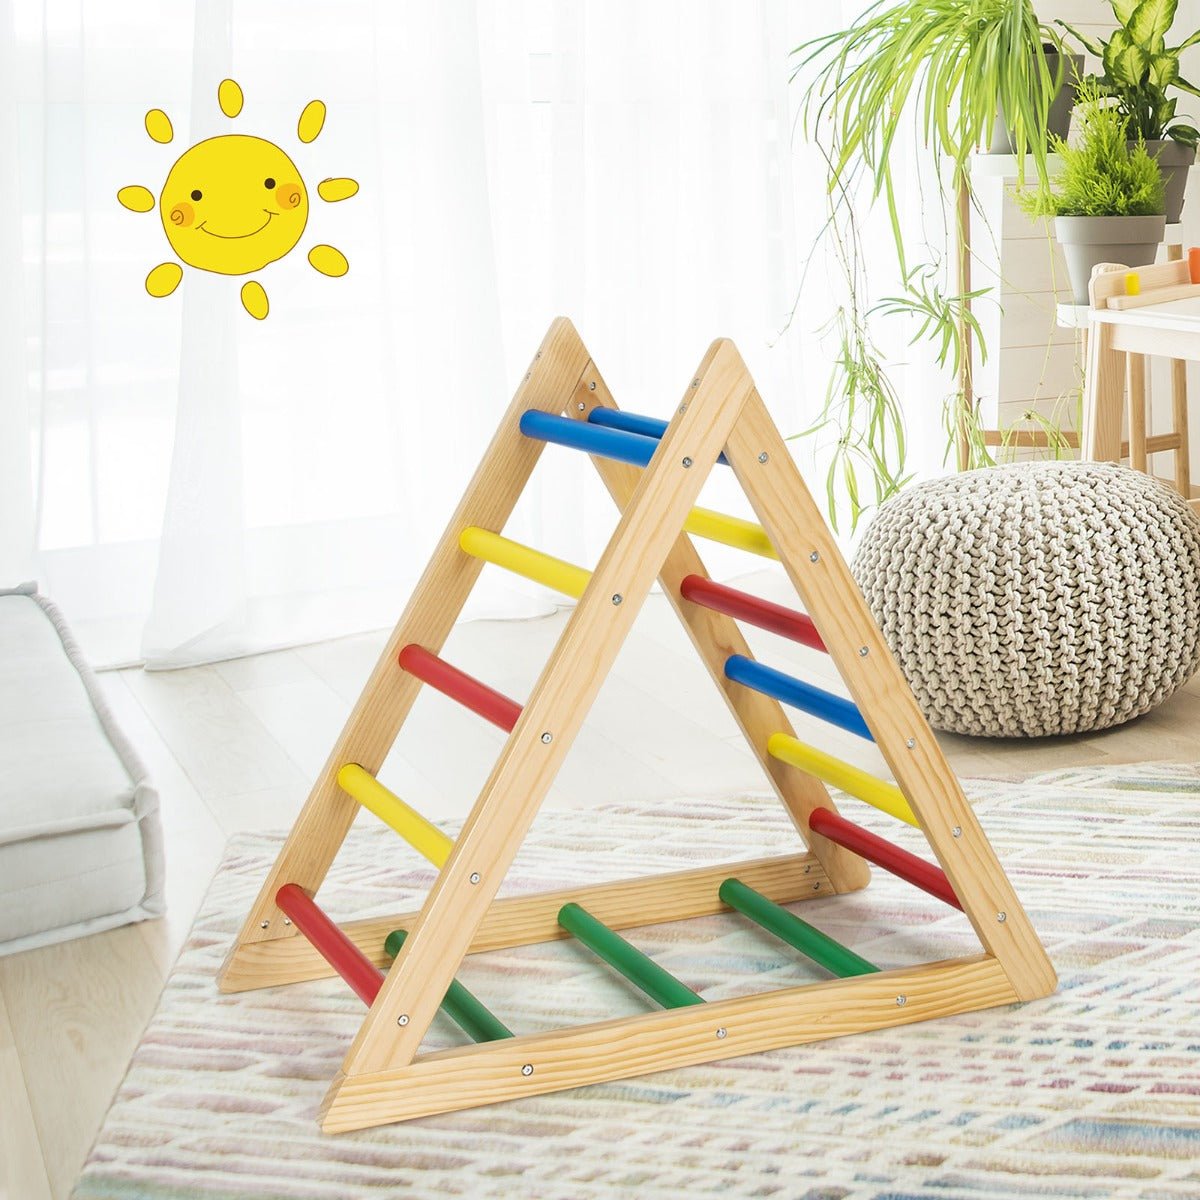 Kid-Friendly colourful Climbing Triangle Ladder - Room for Active Exploration